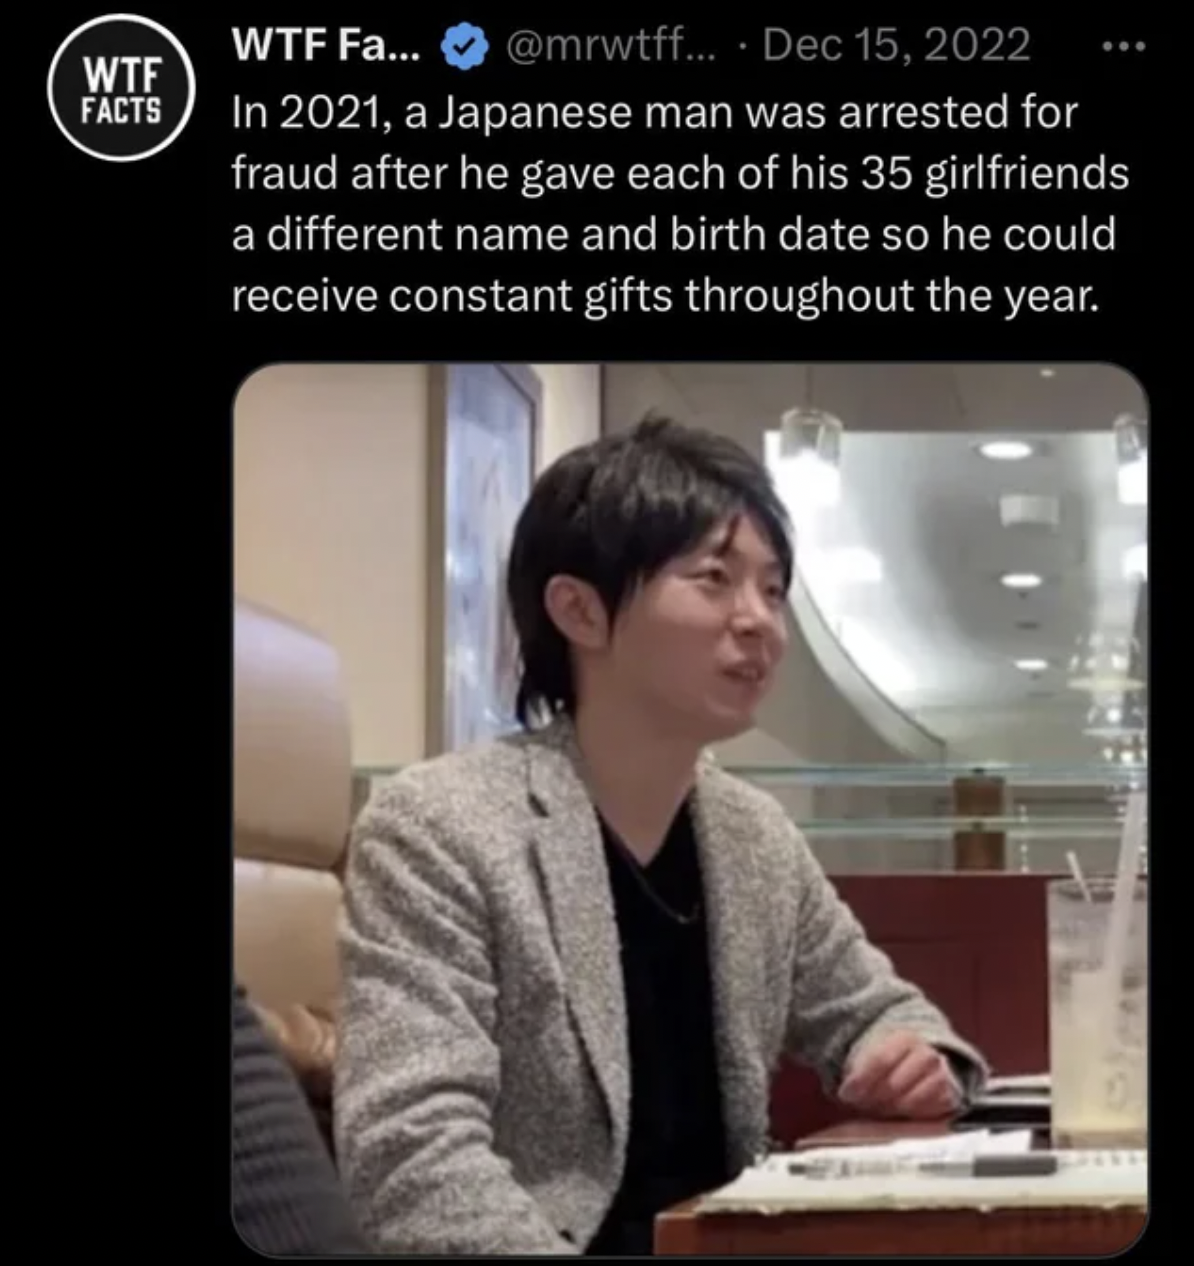 funny facepalms - man with 35 girlfriends - Wtf Facts Wtf Fa... .... In 2021, a Japanese man was arrested for fraud after he gave each of his 35 girlfriends a different name and birth date so he could receive constant gifts throughout the year.